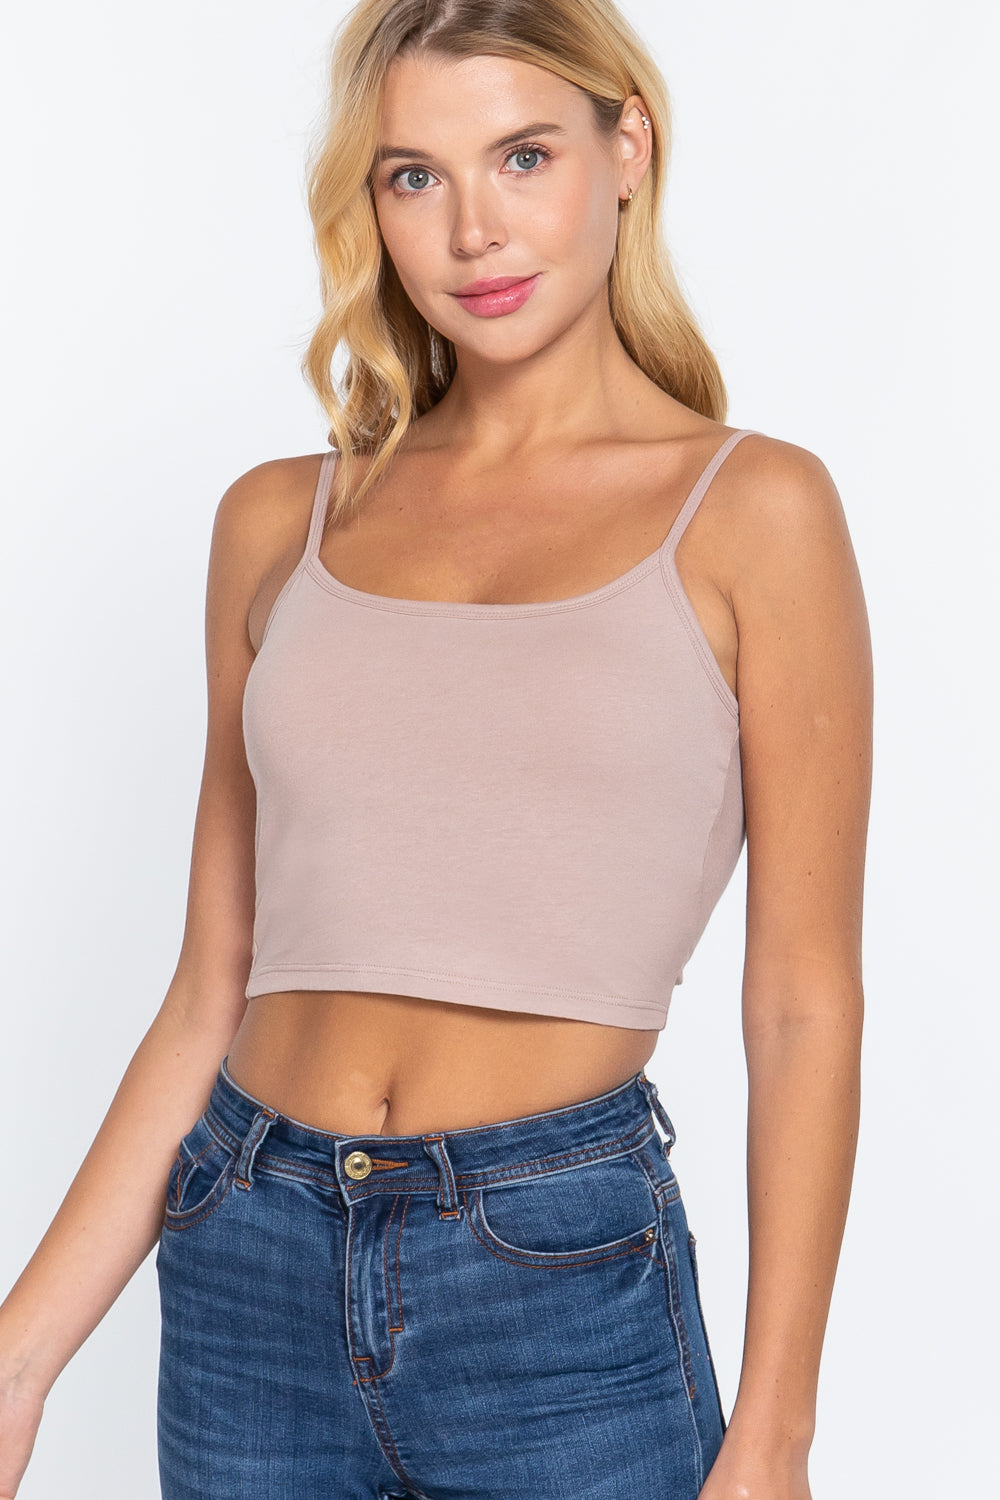 Round Neck with Removable Bra Cup Cotton Spandex Bra Top in Cloud Mauve